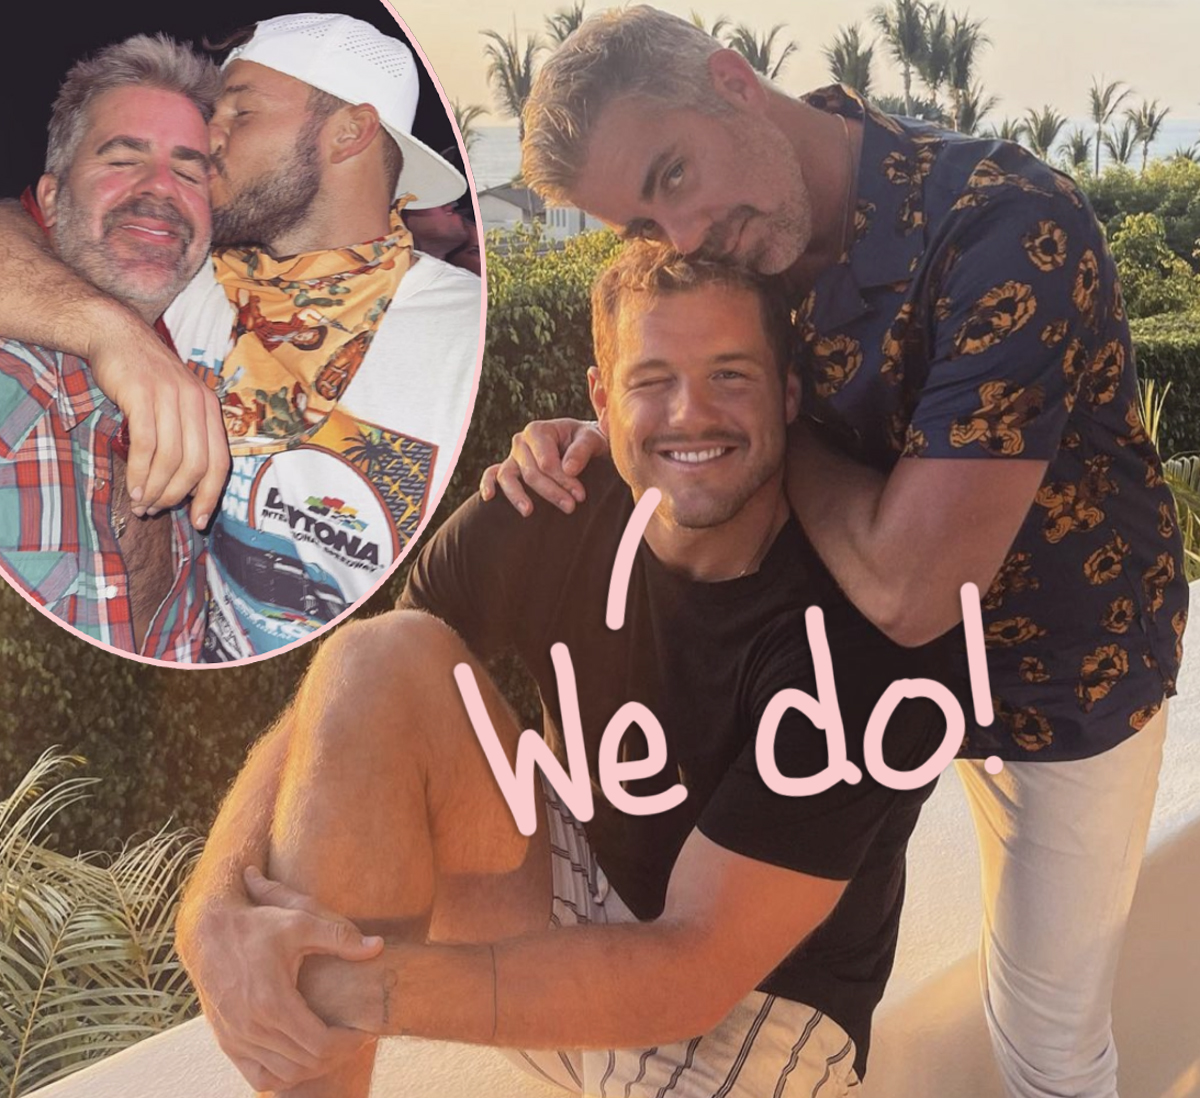 Former Bachelor Colton Underwood Is A Married Man! Perez Hilton